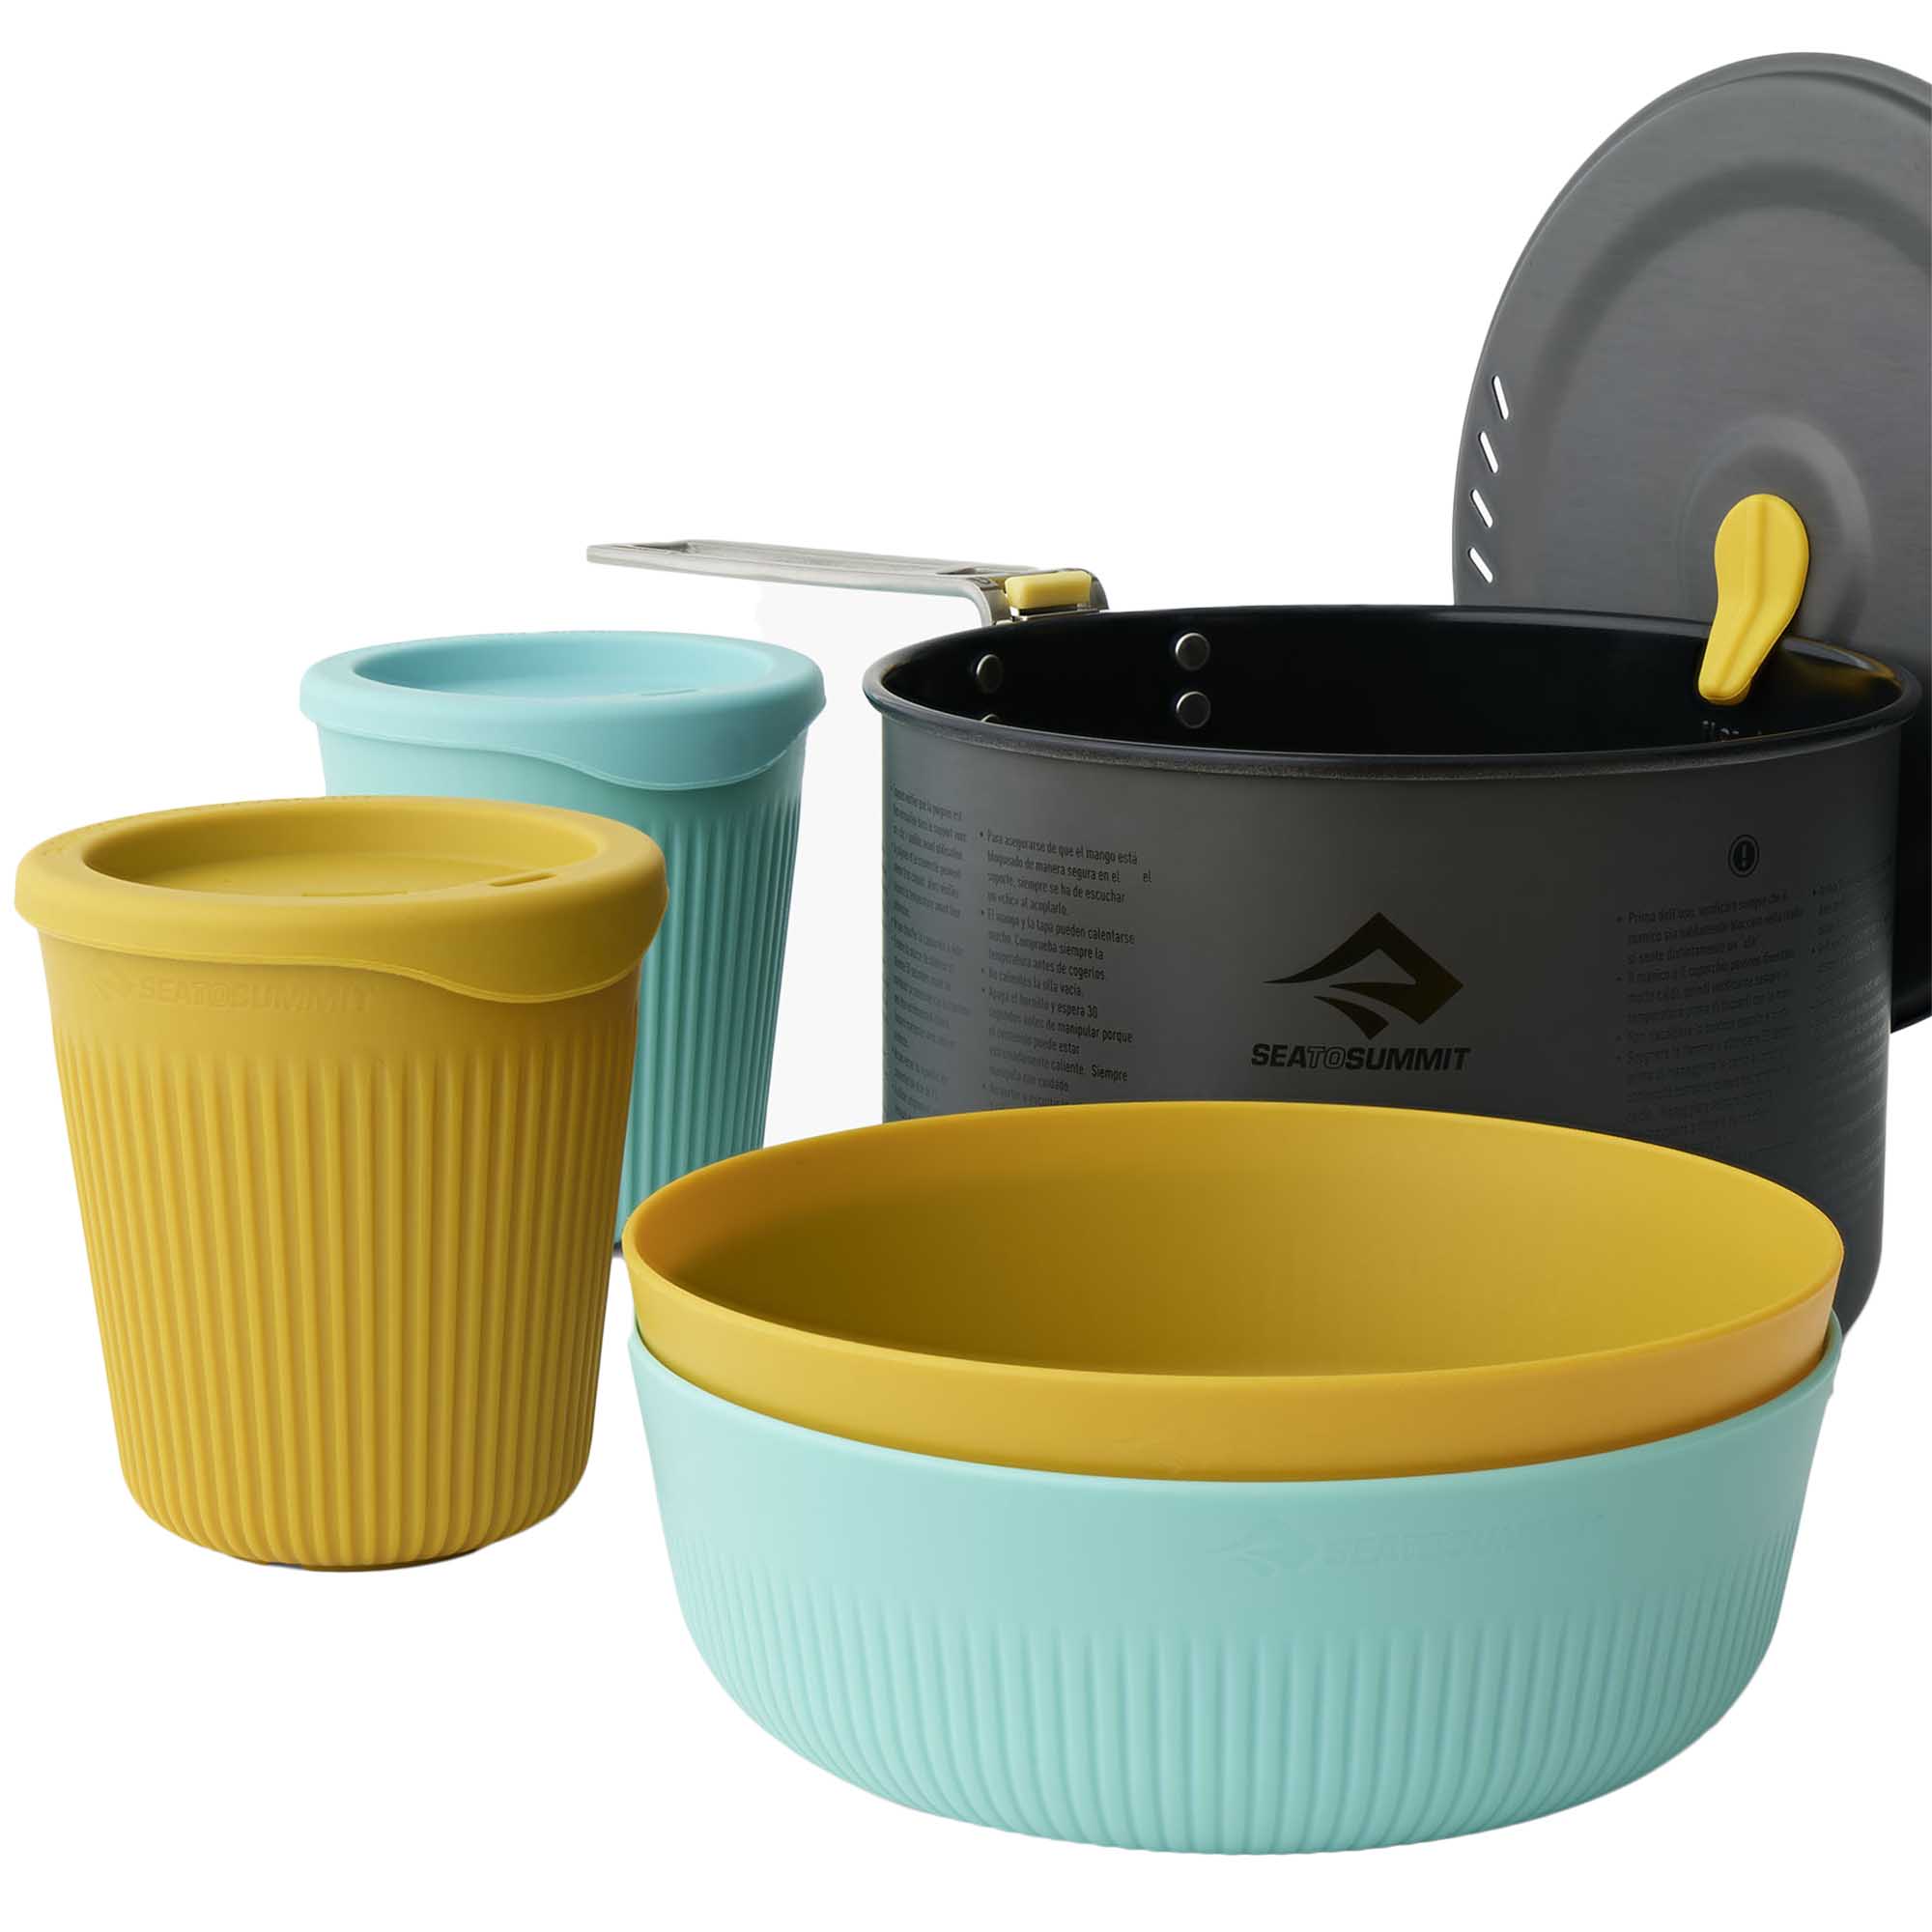 Sea to Summit Frontier 5pc Ultralight One Pot Cook Set